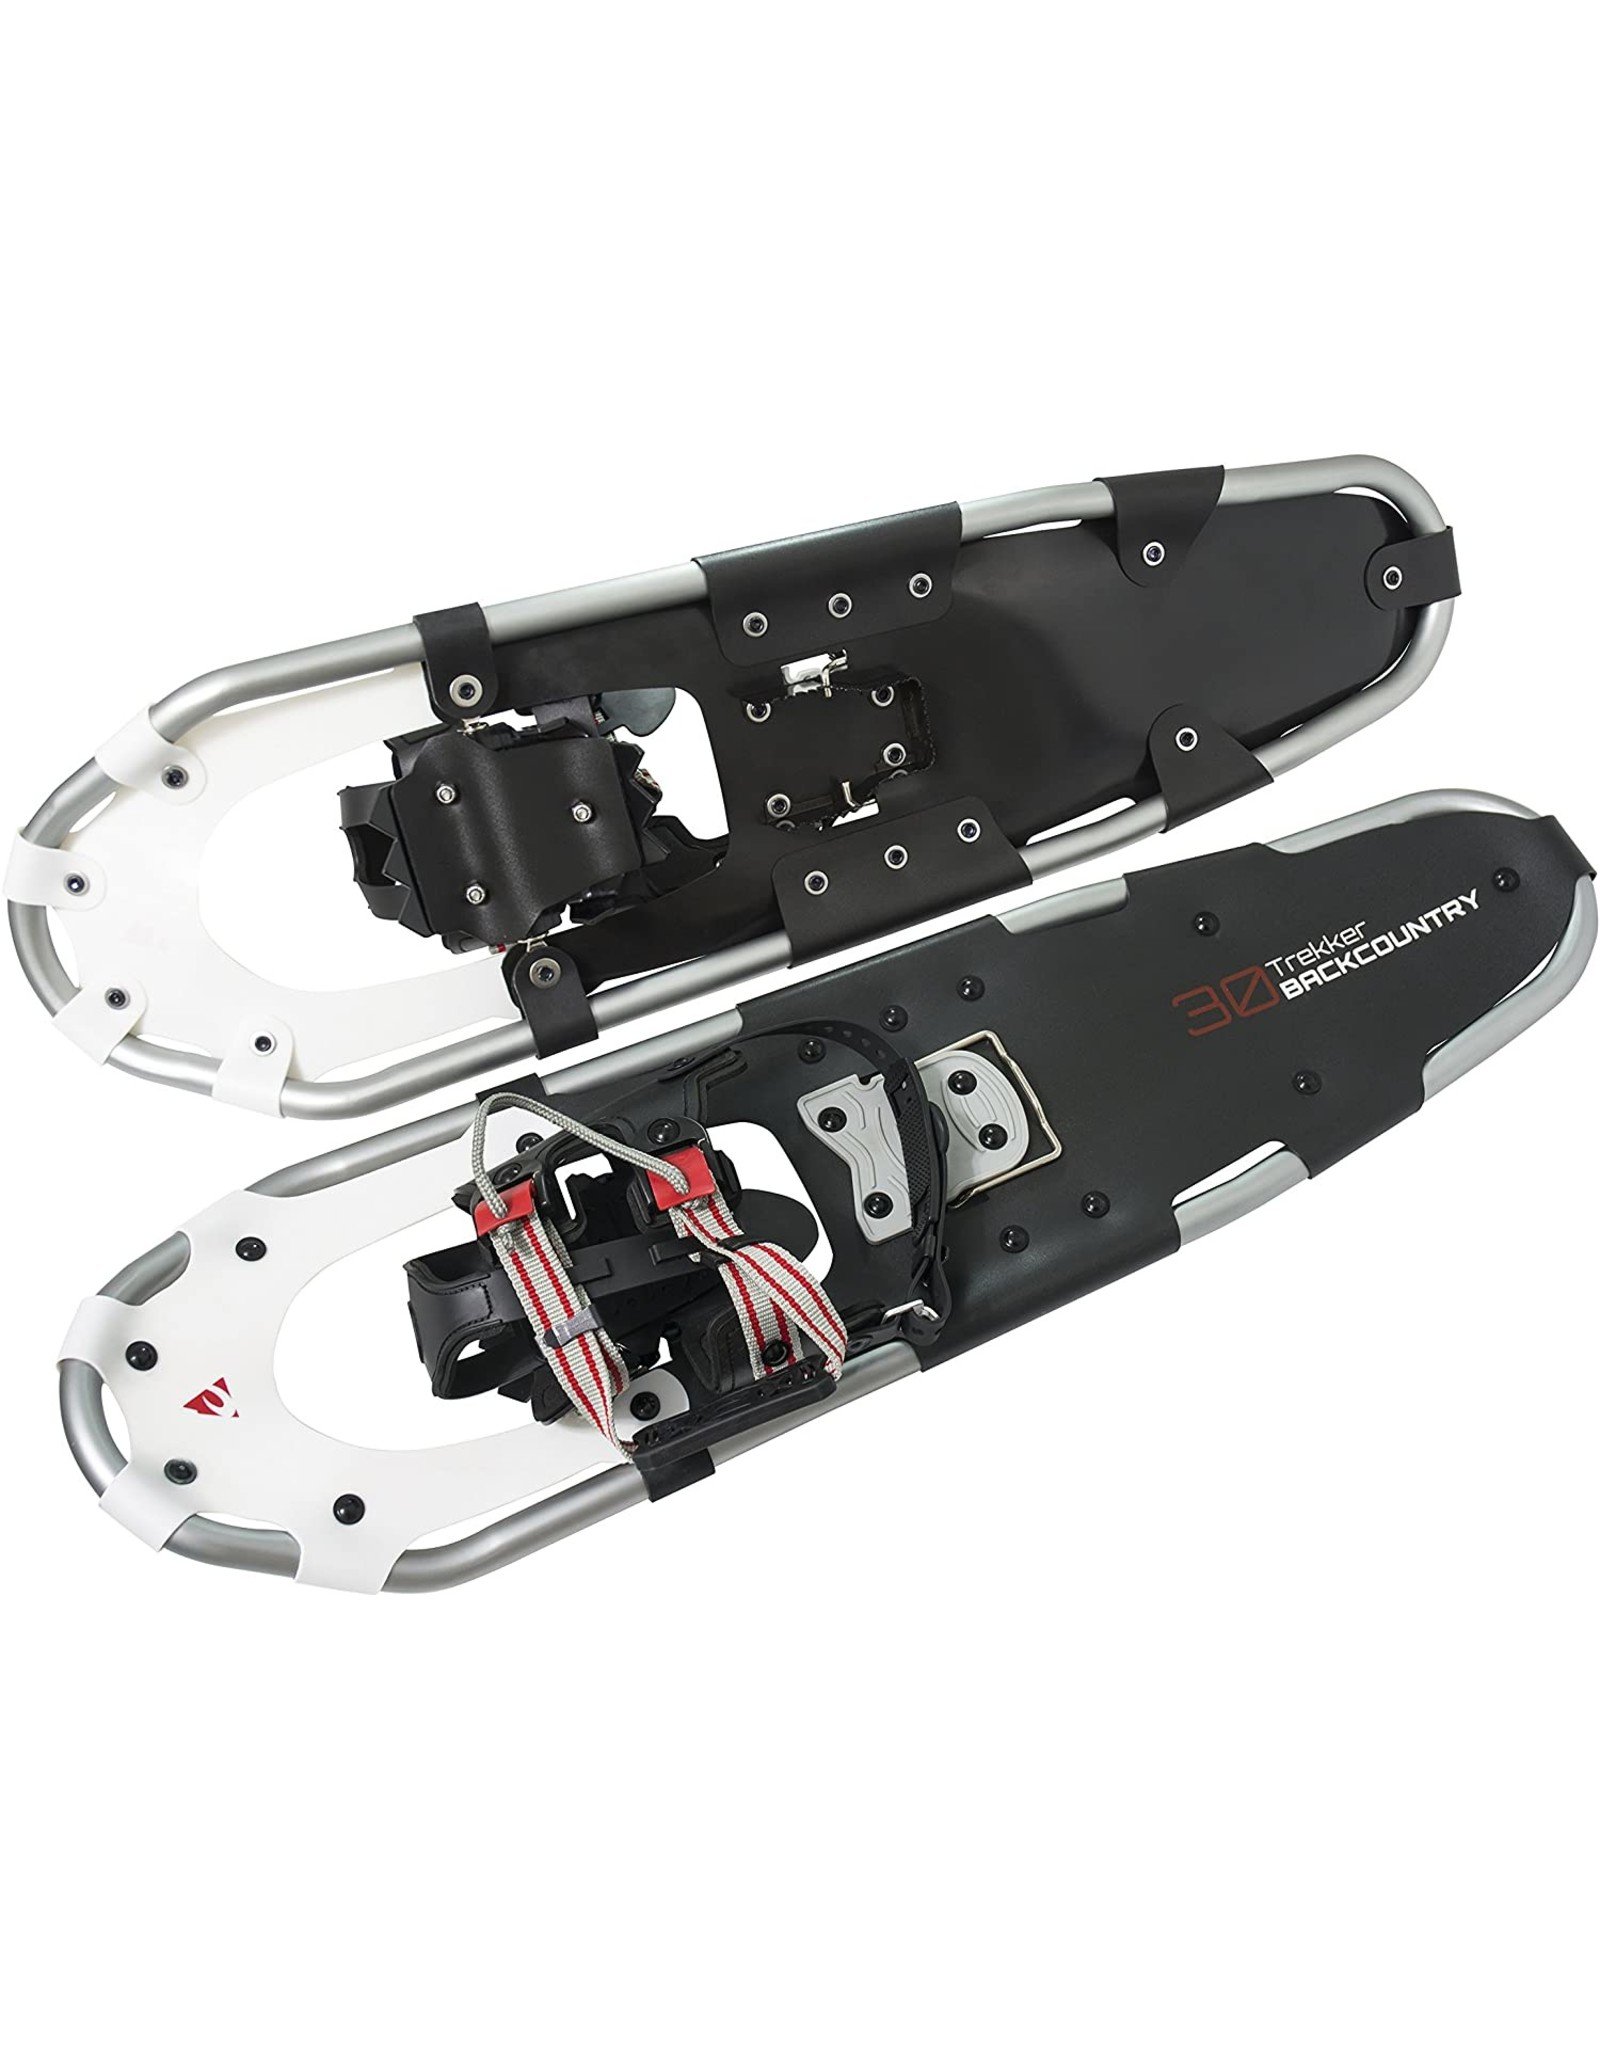 CHINOOK TECHNICAL OUTDOOR TREKKER BACKCOUNTRY SNOWSHOES